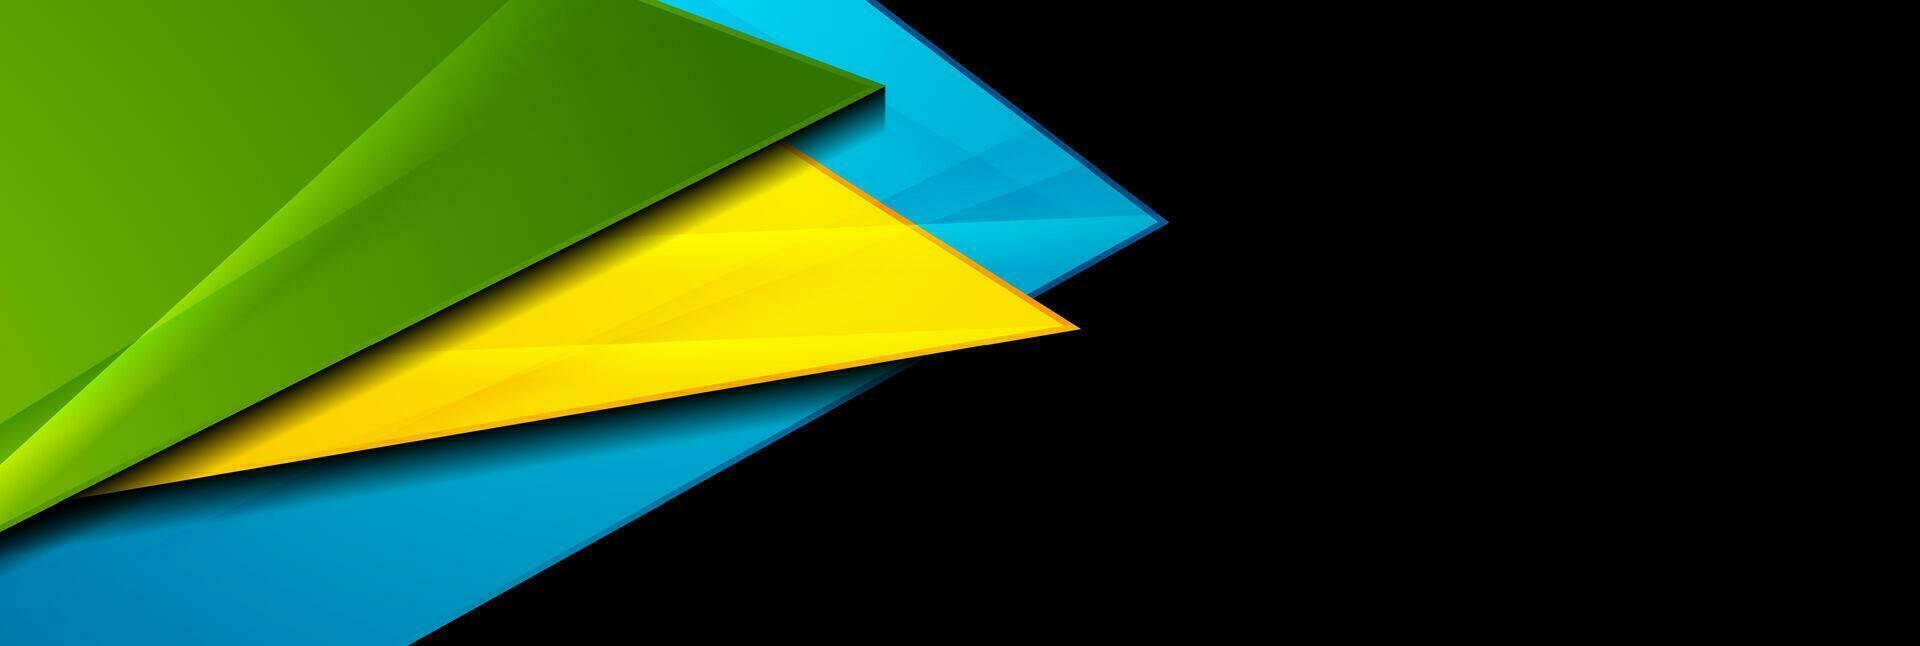 Colorful shiny glossy triangles abstract geometry background vector